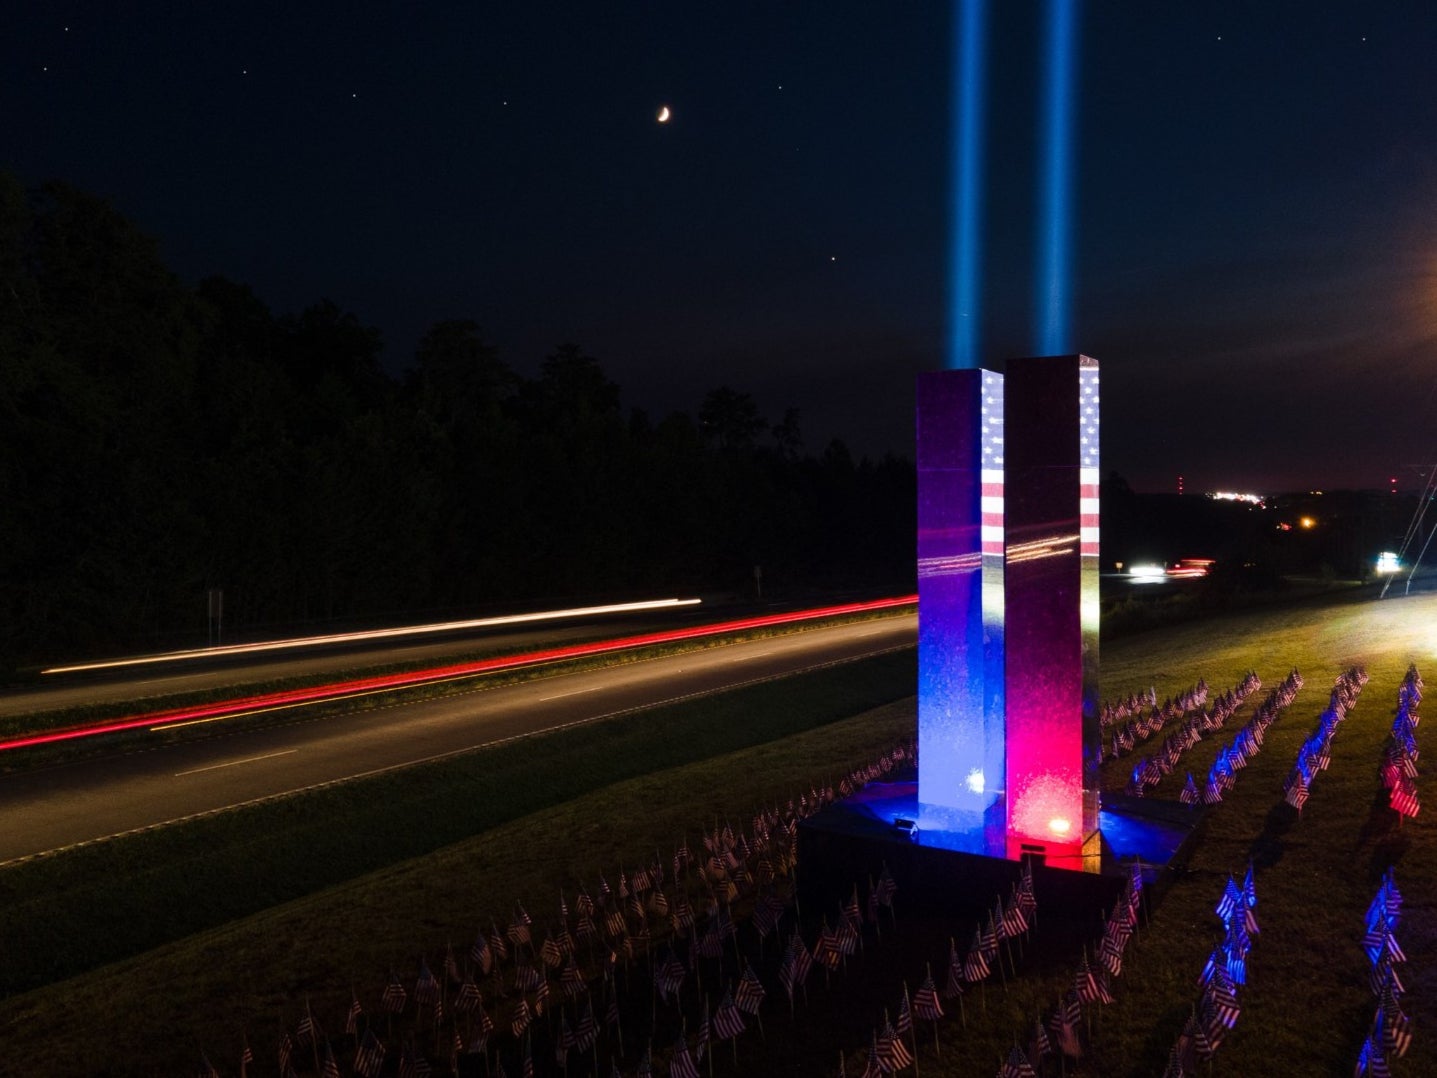 The 9/11 memorial at Upstate Granite Solutions in Greenville, South Carolina fully lit.